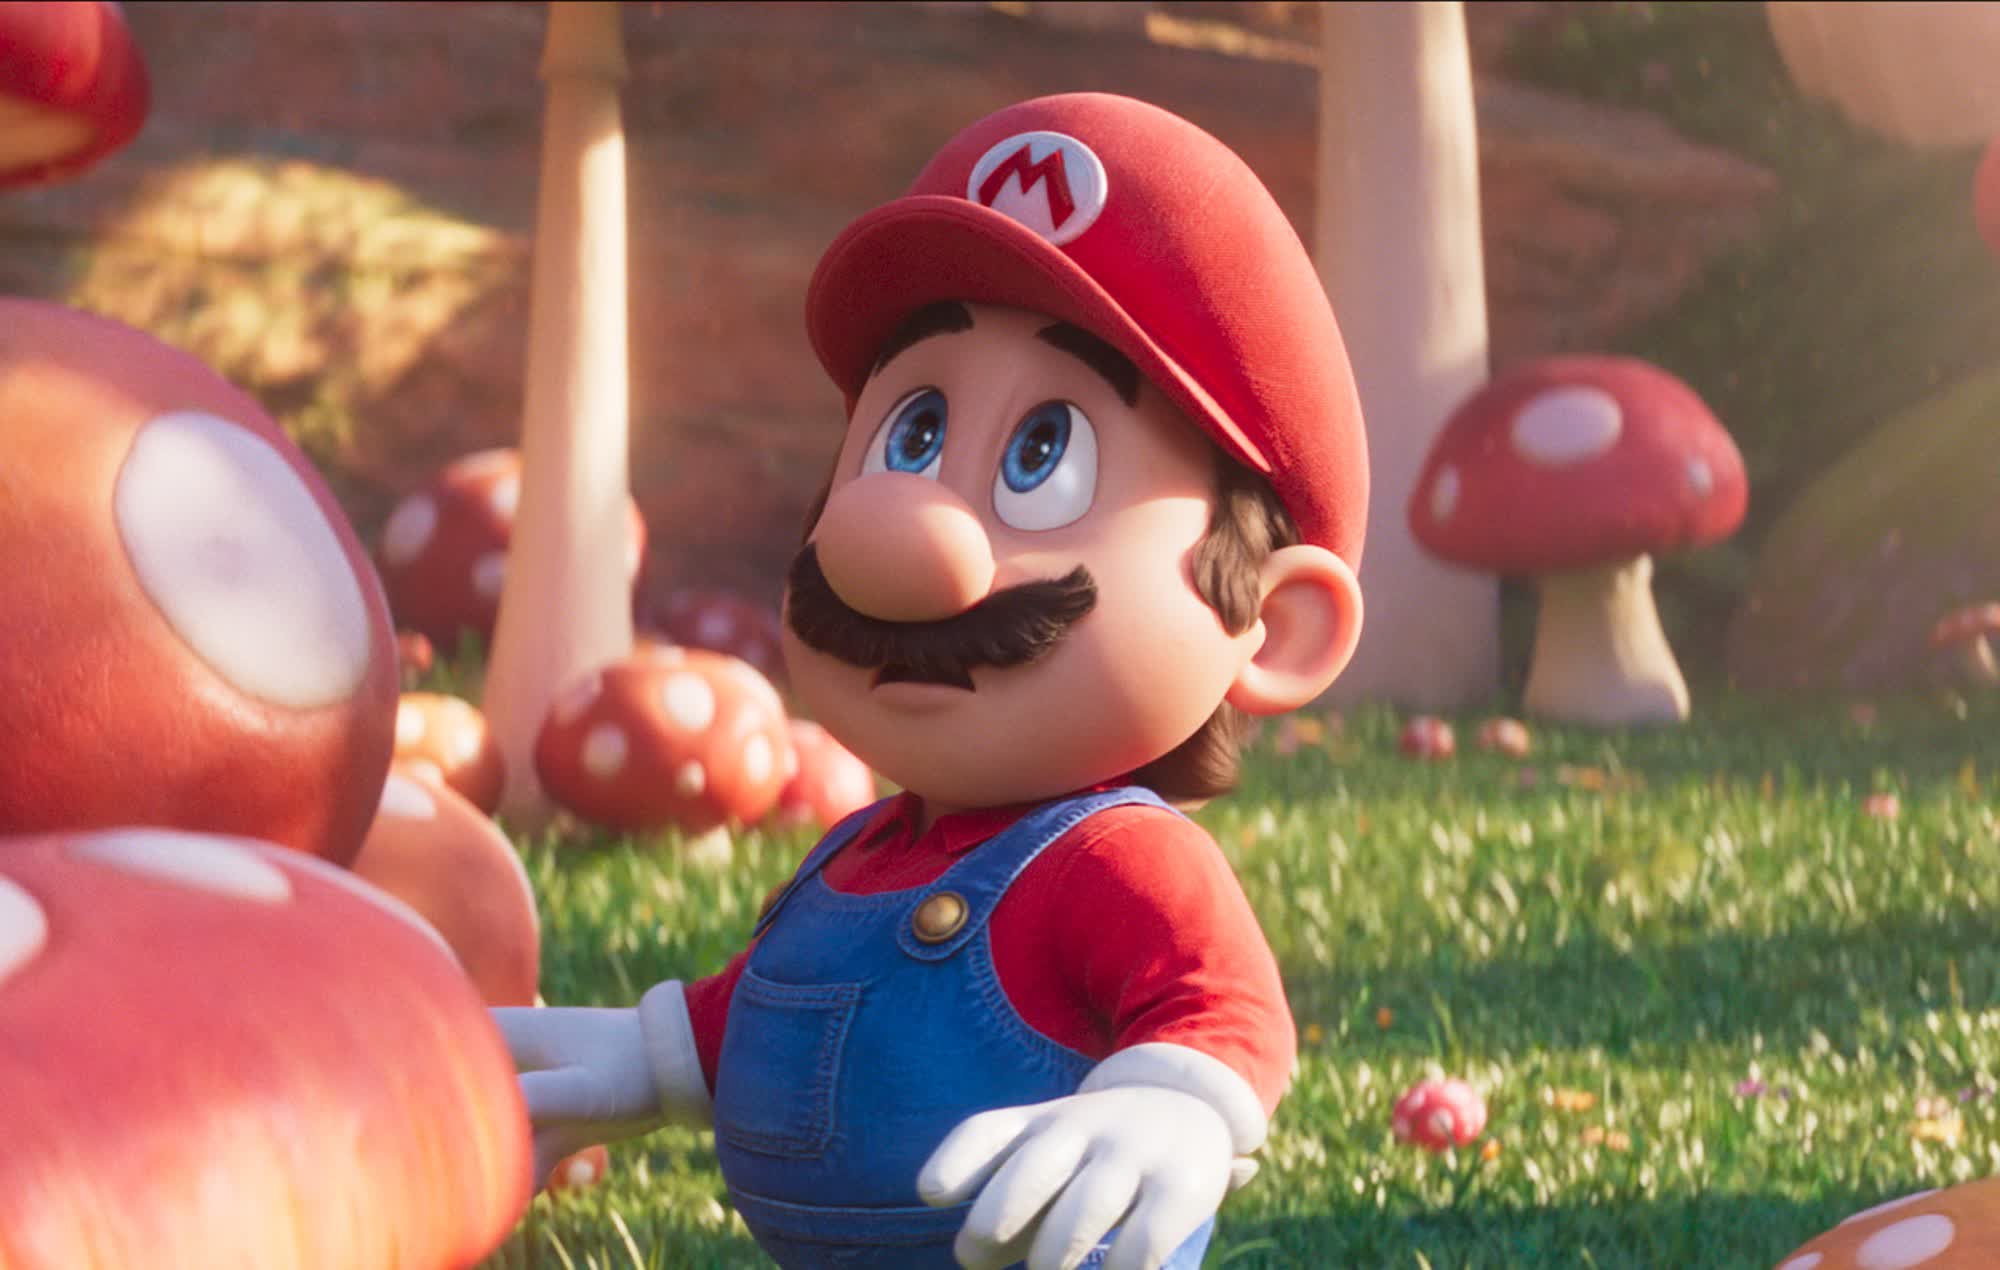 Super Mario Bros. Movie is being illegally shared on social media